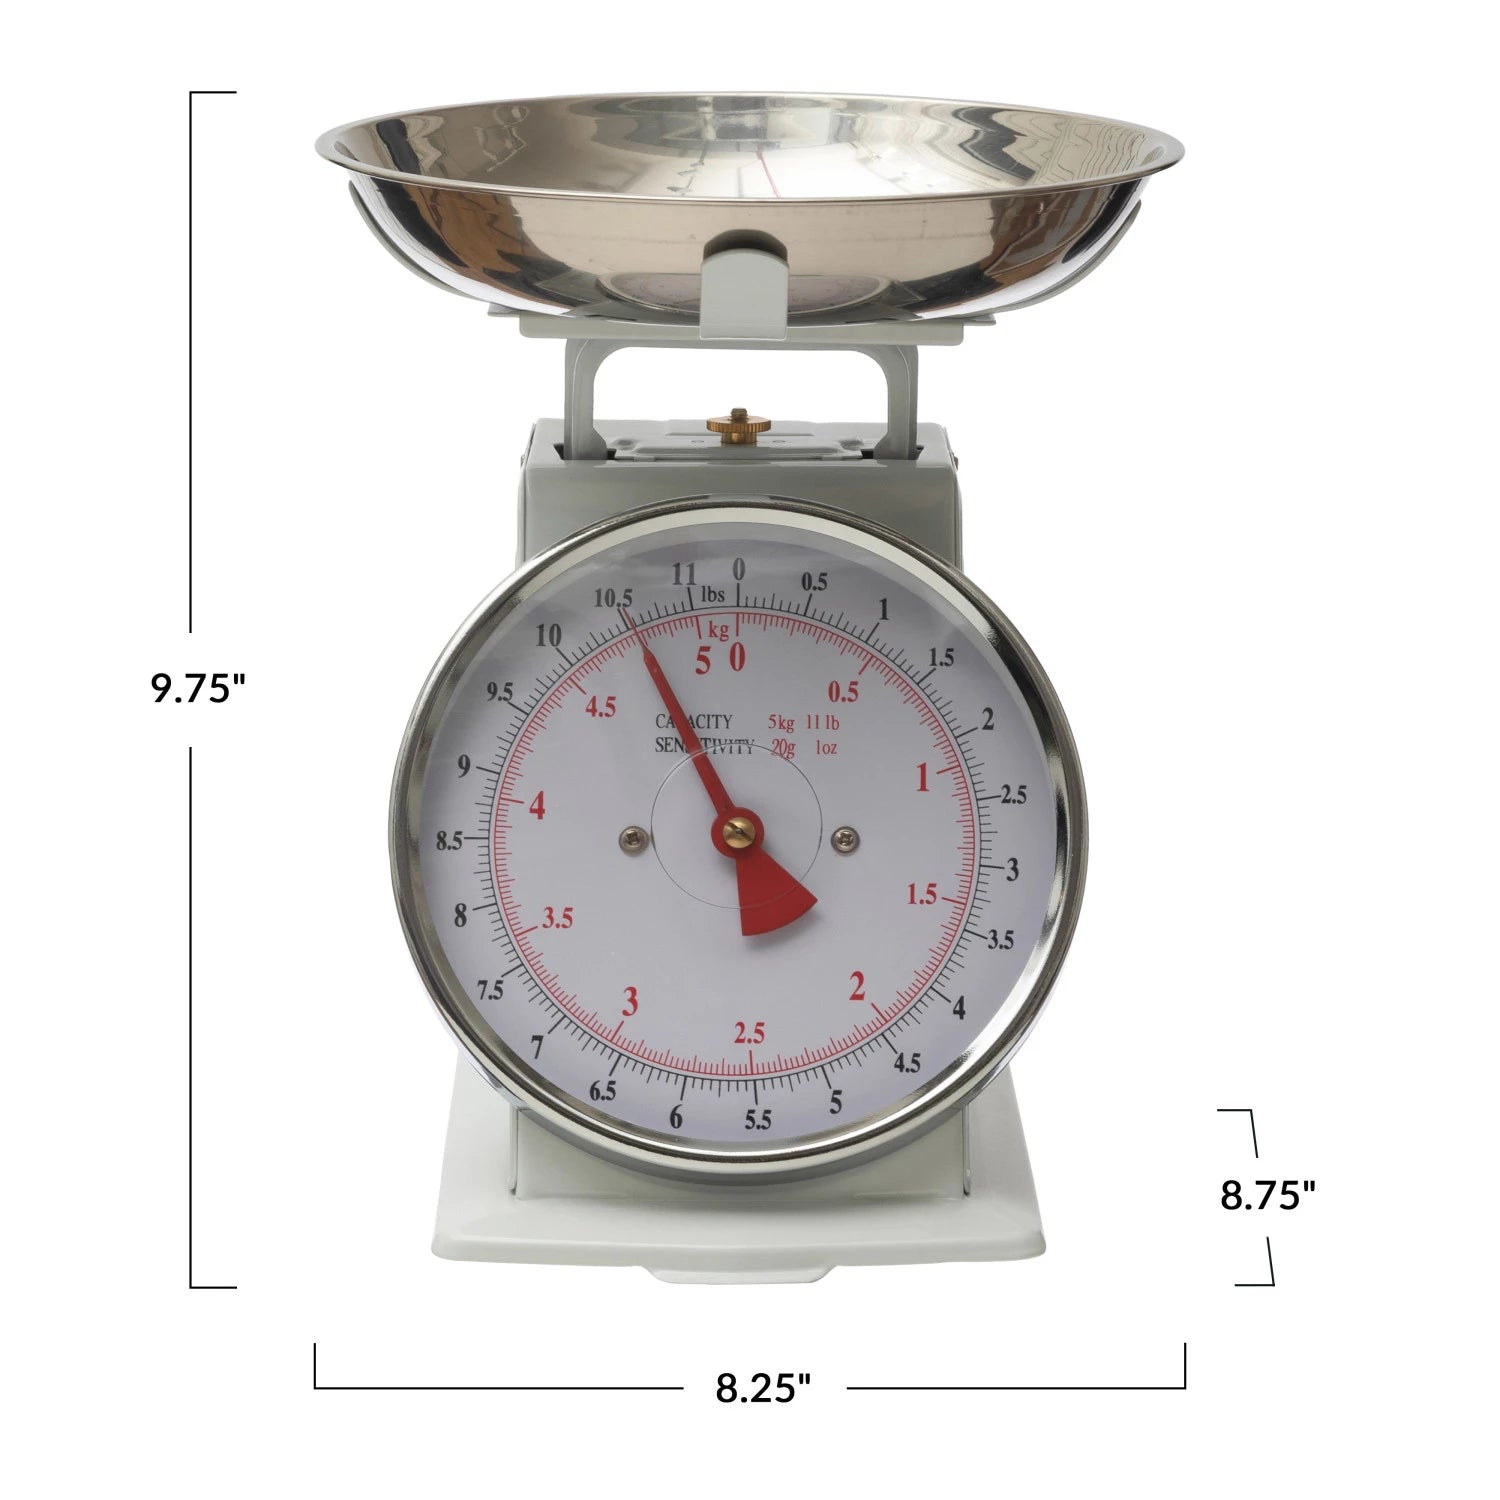 Kitchen Scales for sale in Franklin, Minnesota